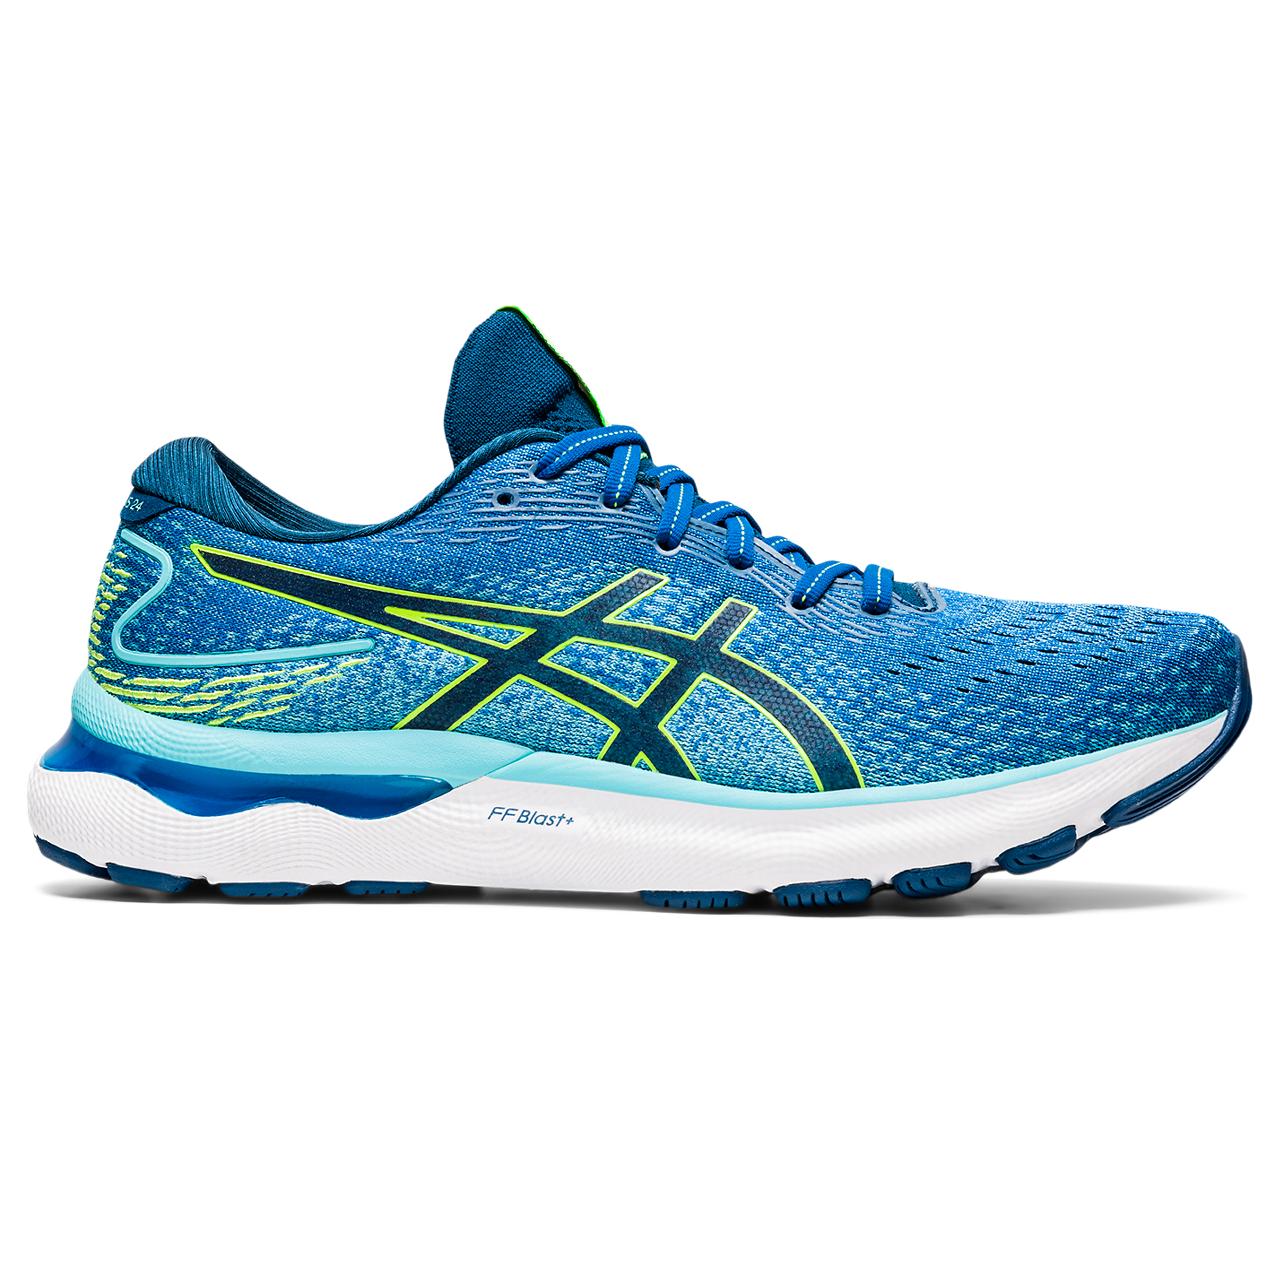 The ASICS Gel-Nimbus 24 offers advanced impact protection for your distance training. Creating a softer landing in every step, this shoe is also approximately 10g lighter than the previous version.